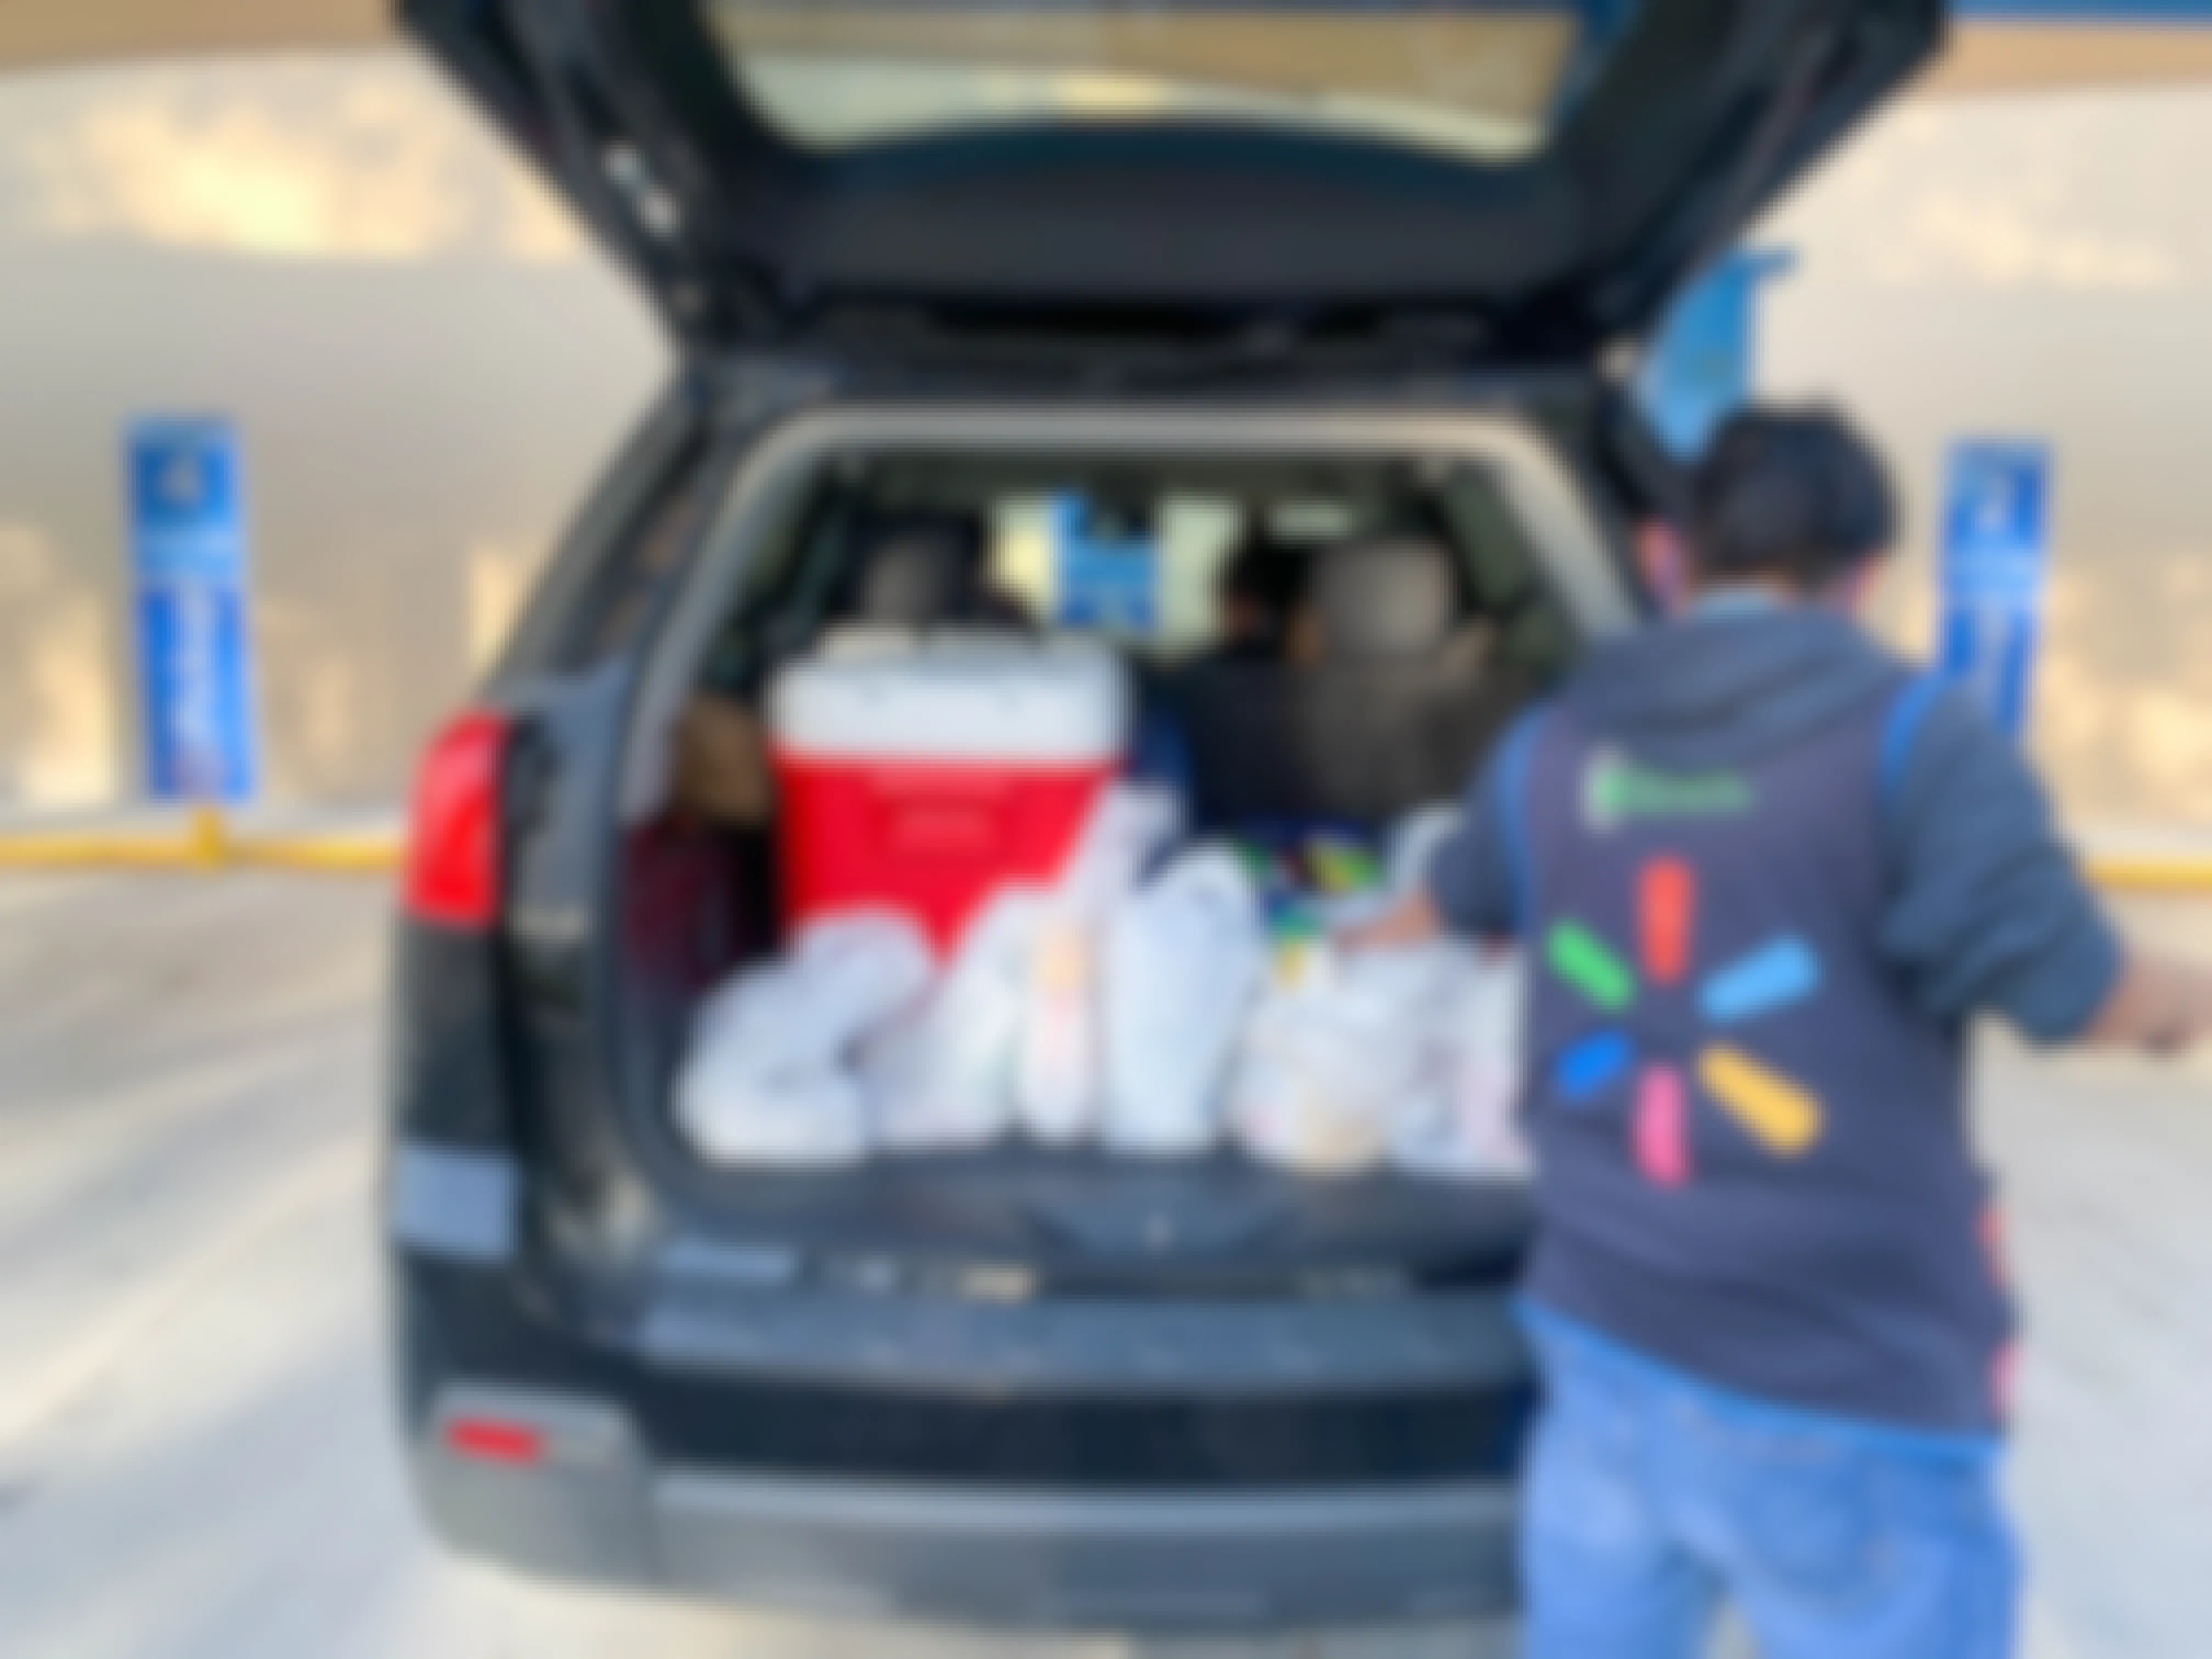 A Walmart employee loading groceries into the trunk of a vehicle parked in the Walmart Pickup spot.